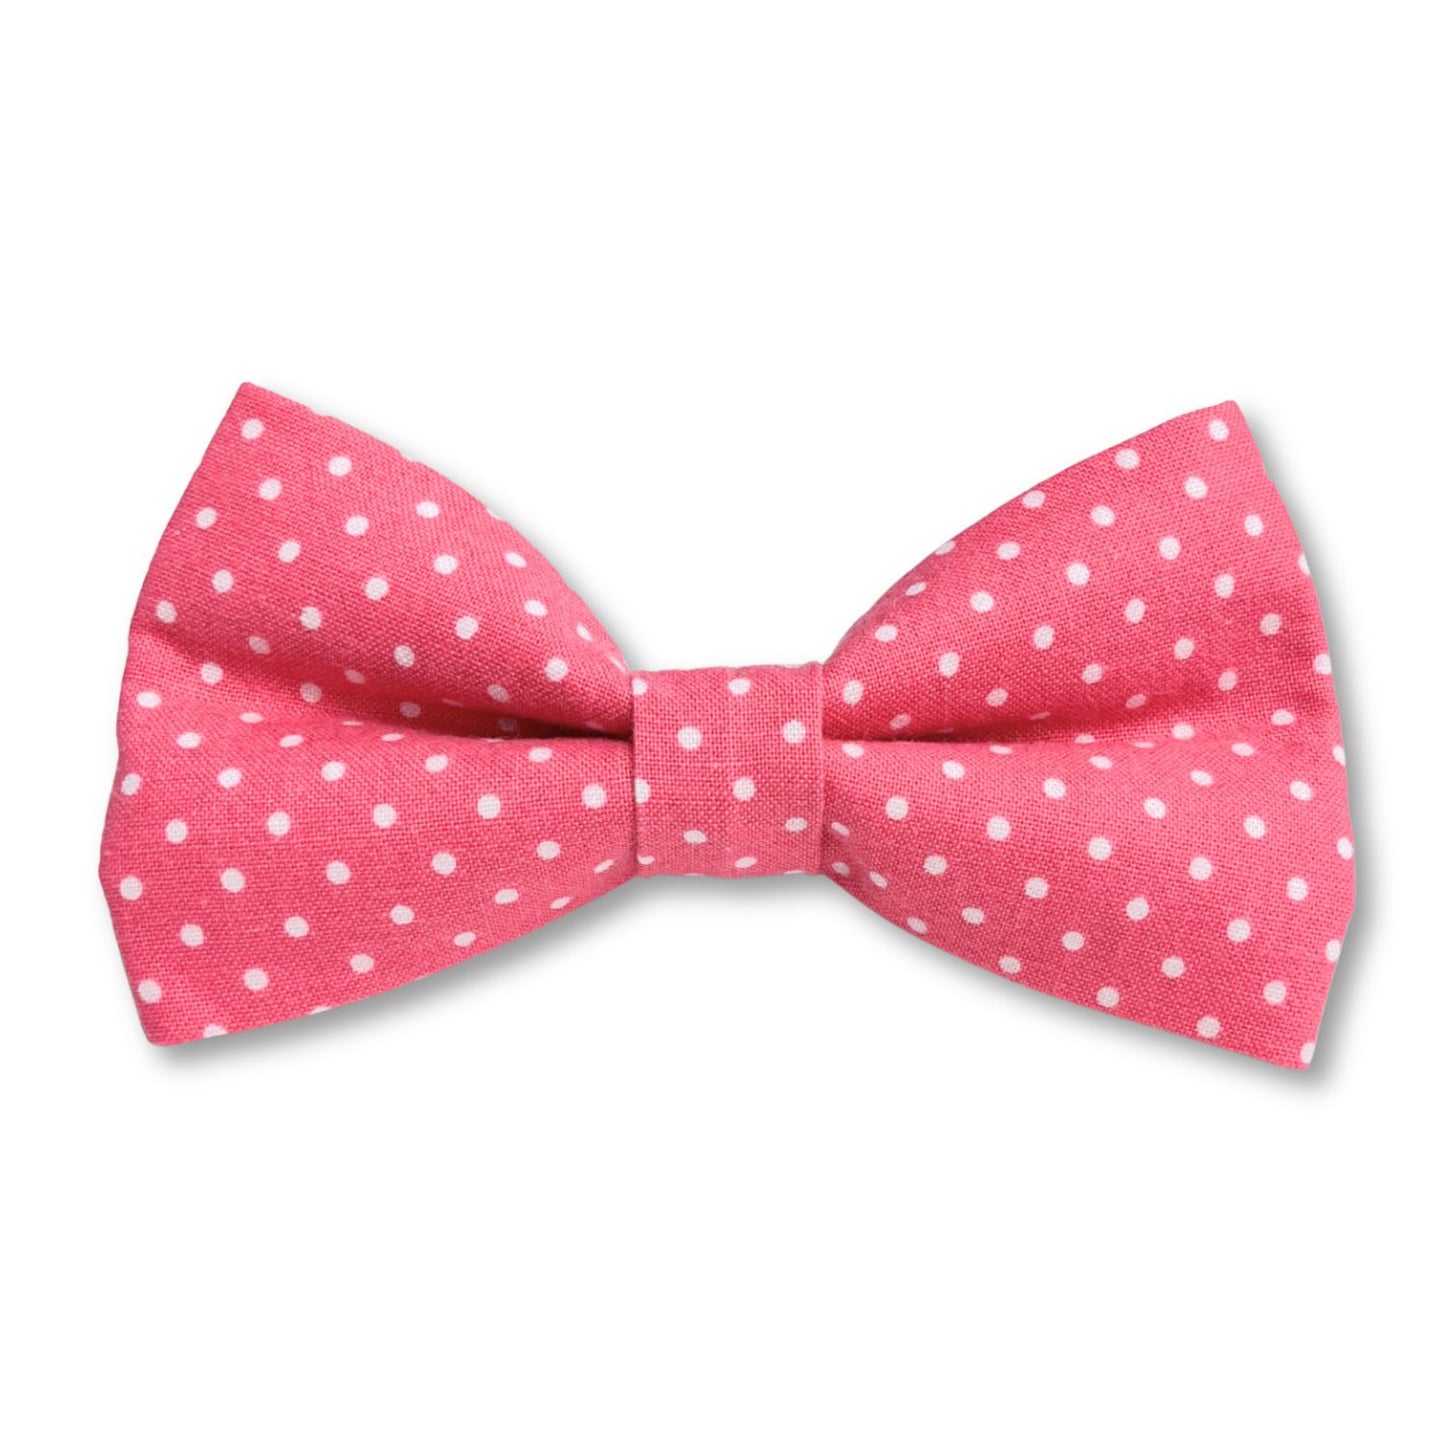 Pink and White Polka Dots Dog Bow Tie